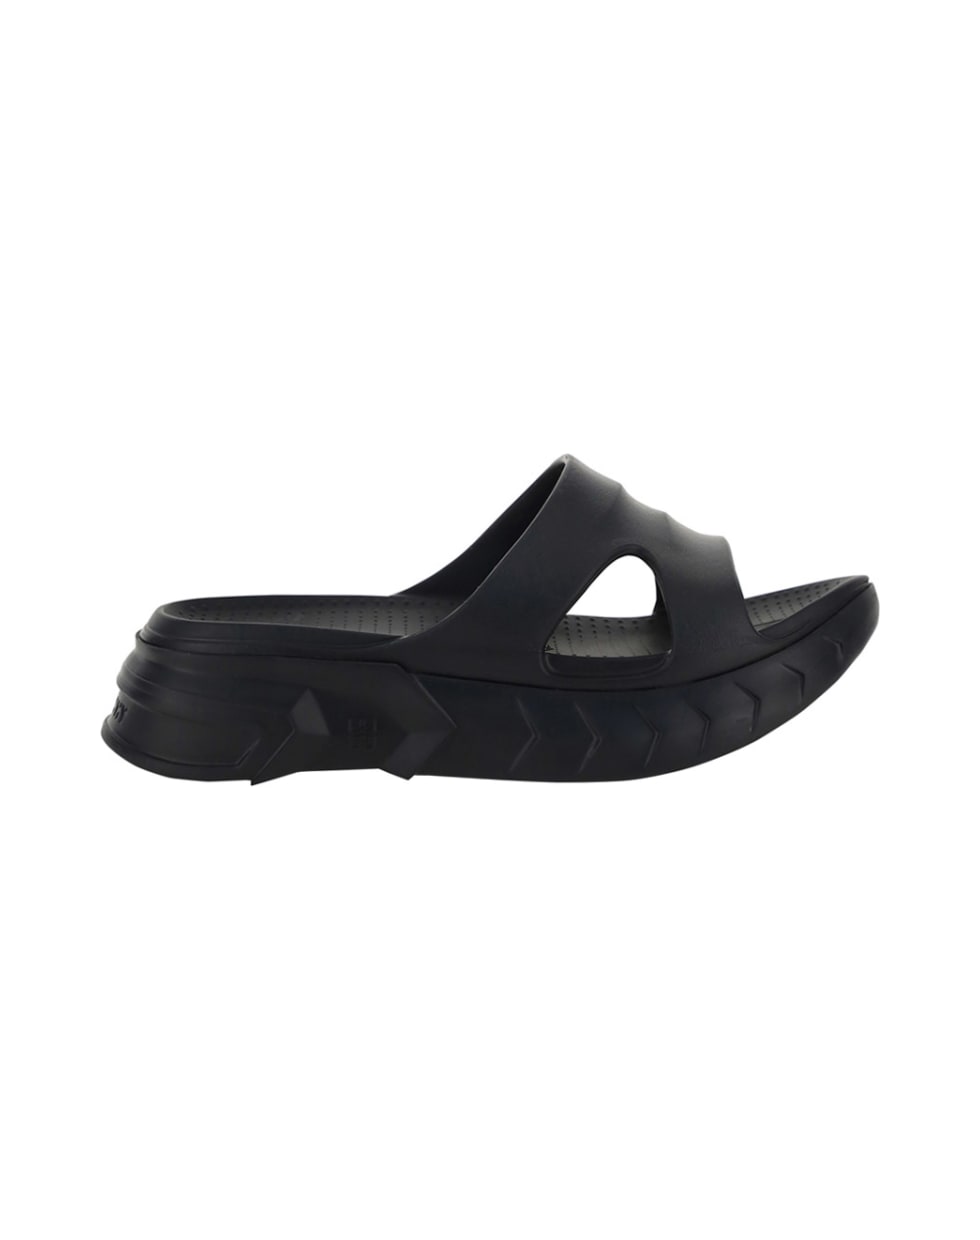 Givenchy Marshmallow Sandals - Black